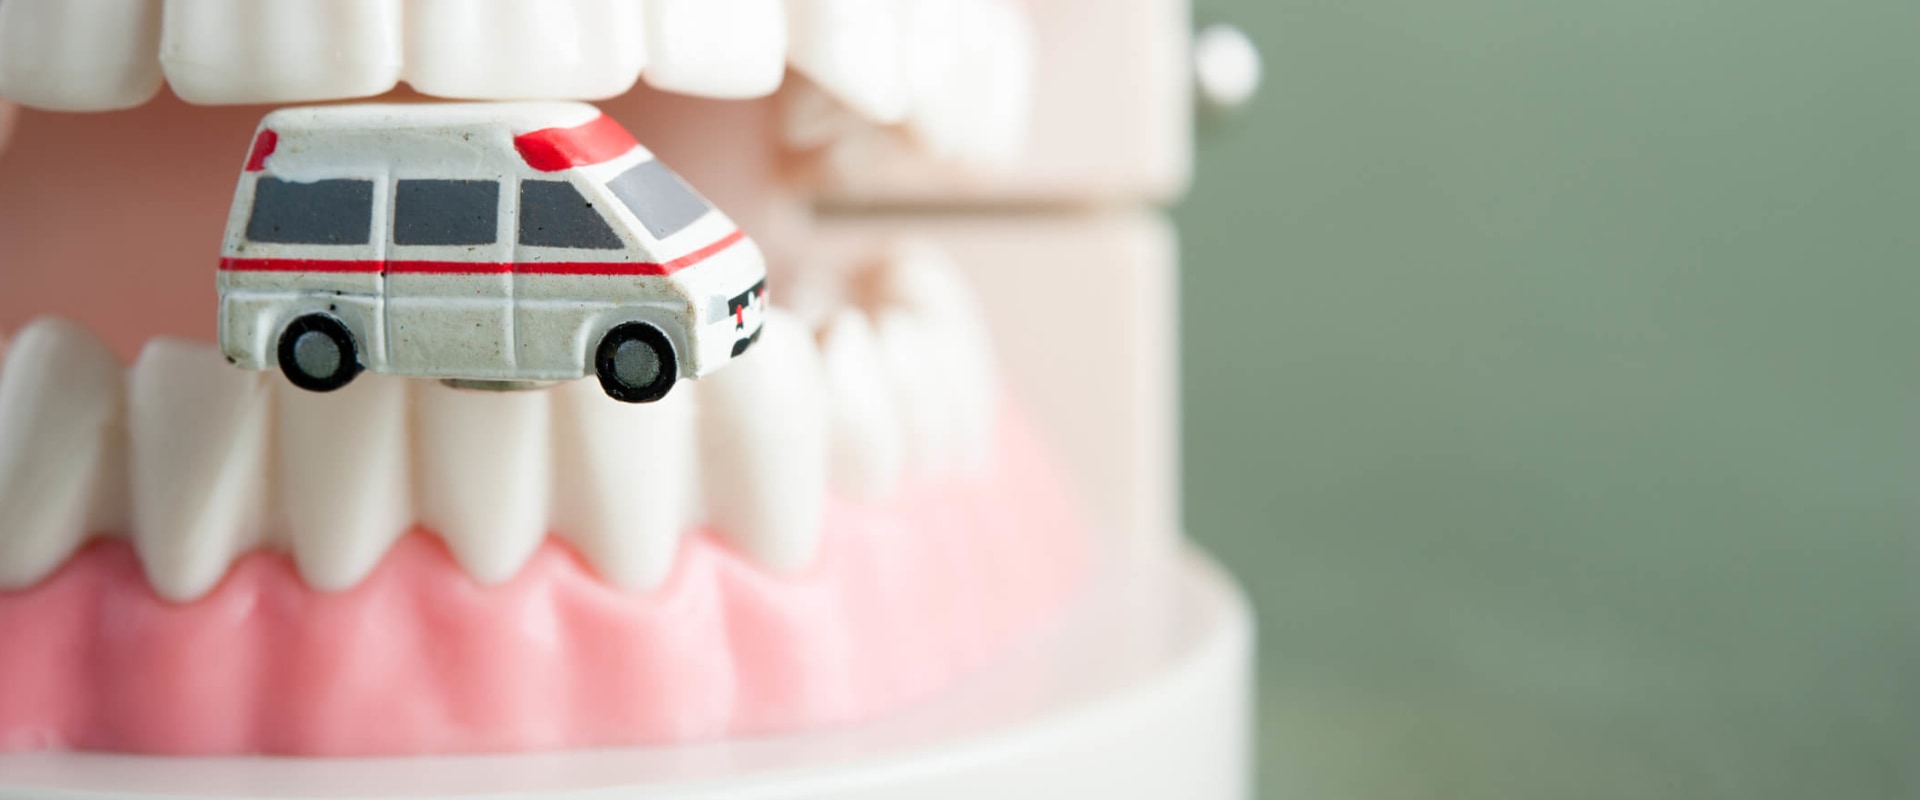 Can an Emergency Dentist Provide Me with a Temporary Filling on the Same Day of My Visit?